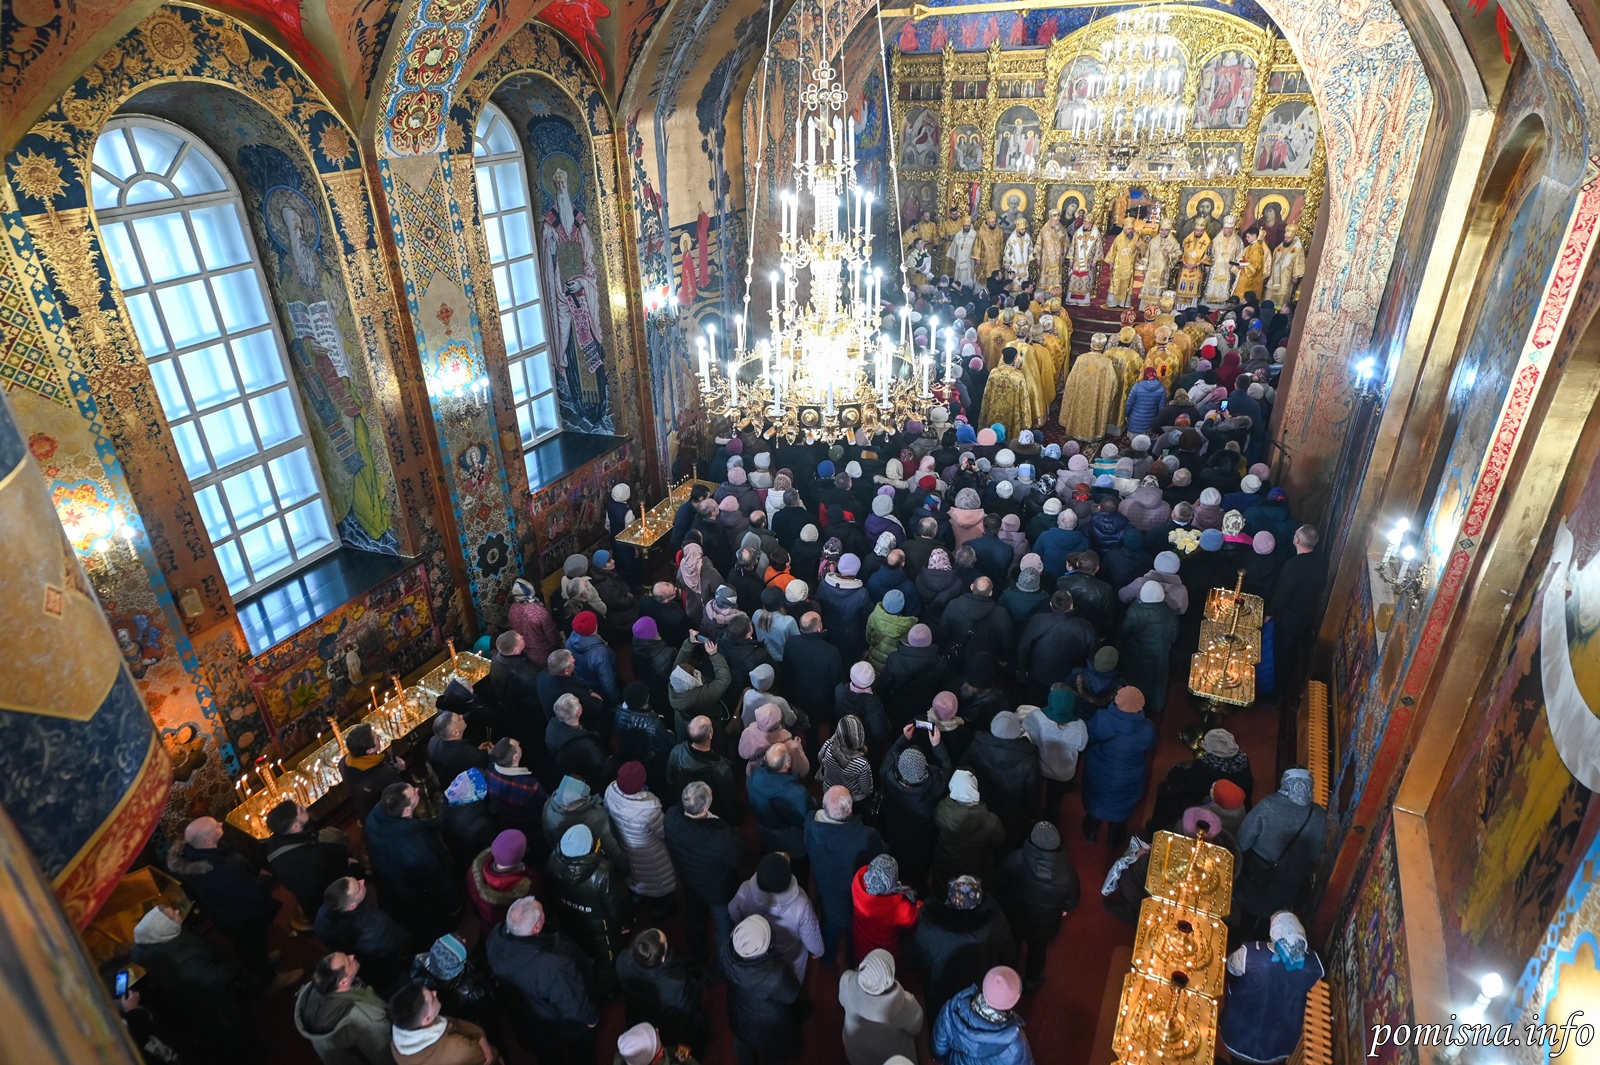 Metropolitan of Kyiv visited Eparchy of Zhytomyr and Ovruch